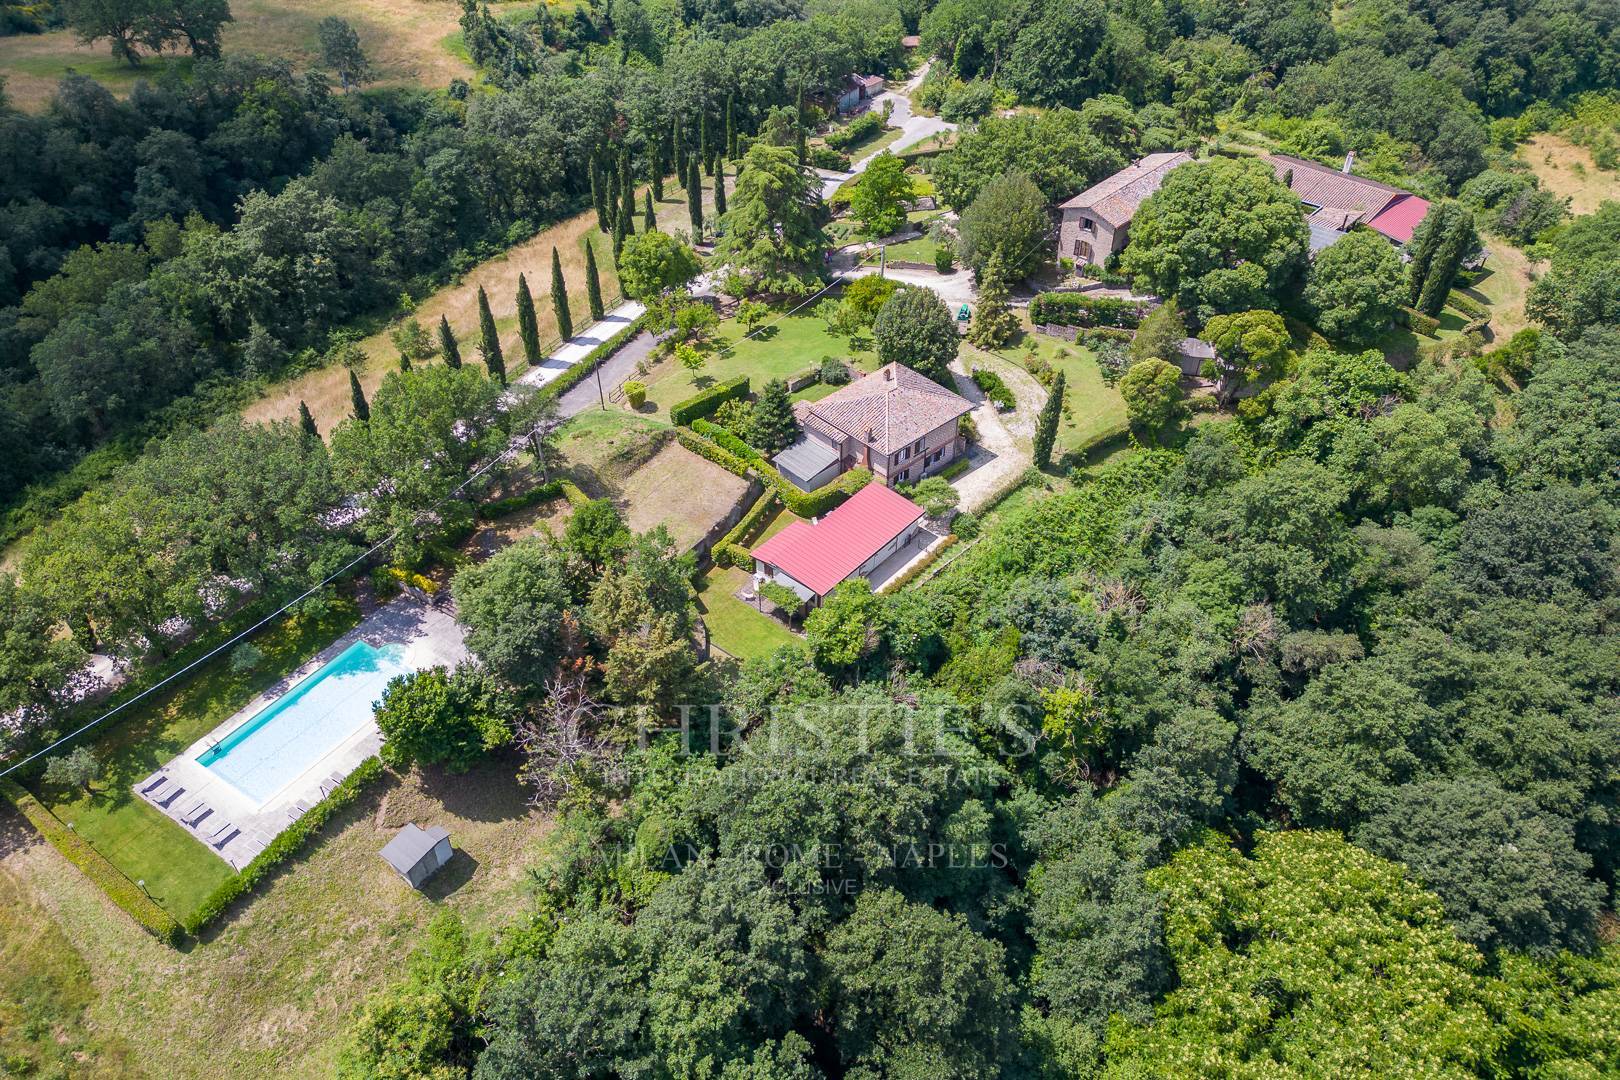 picture of Enchanting Estate On The Hills Of The Tiber Valley